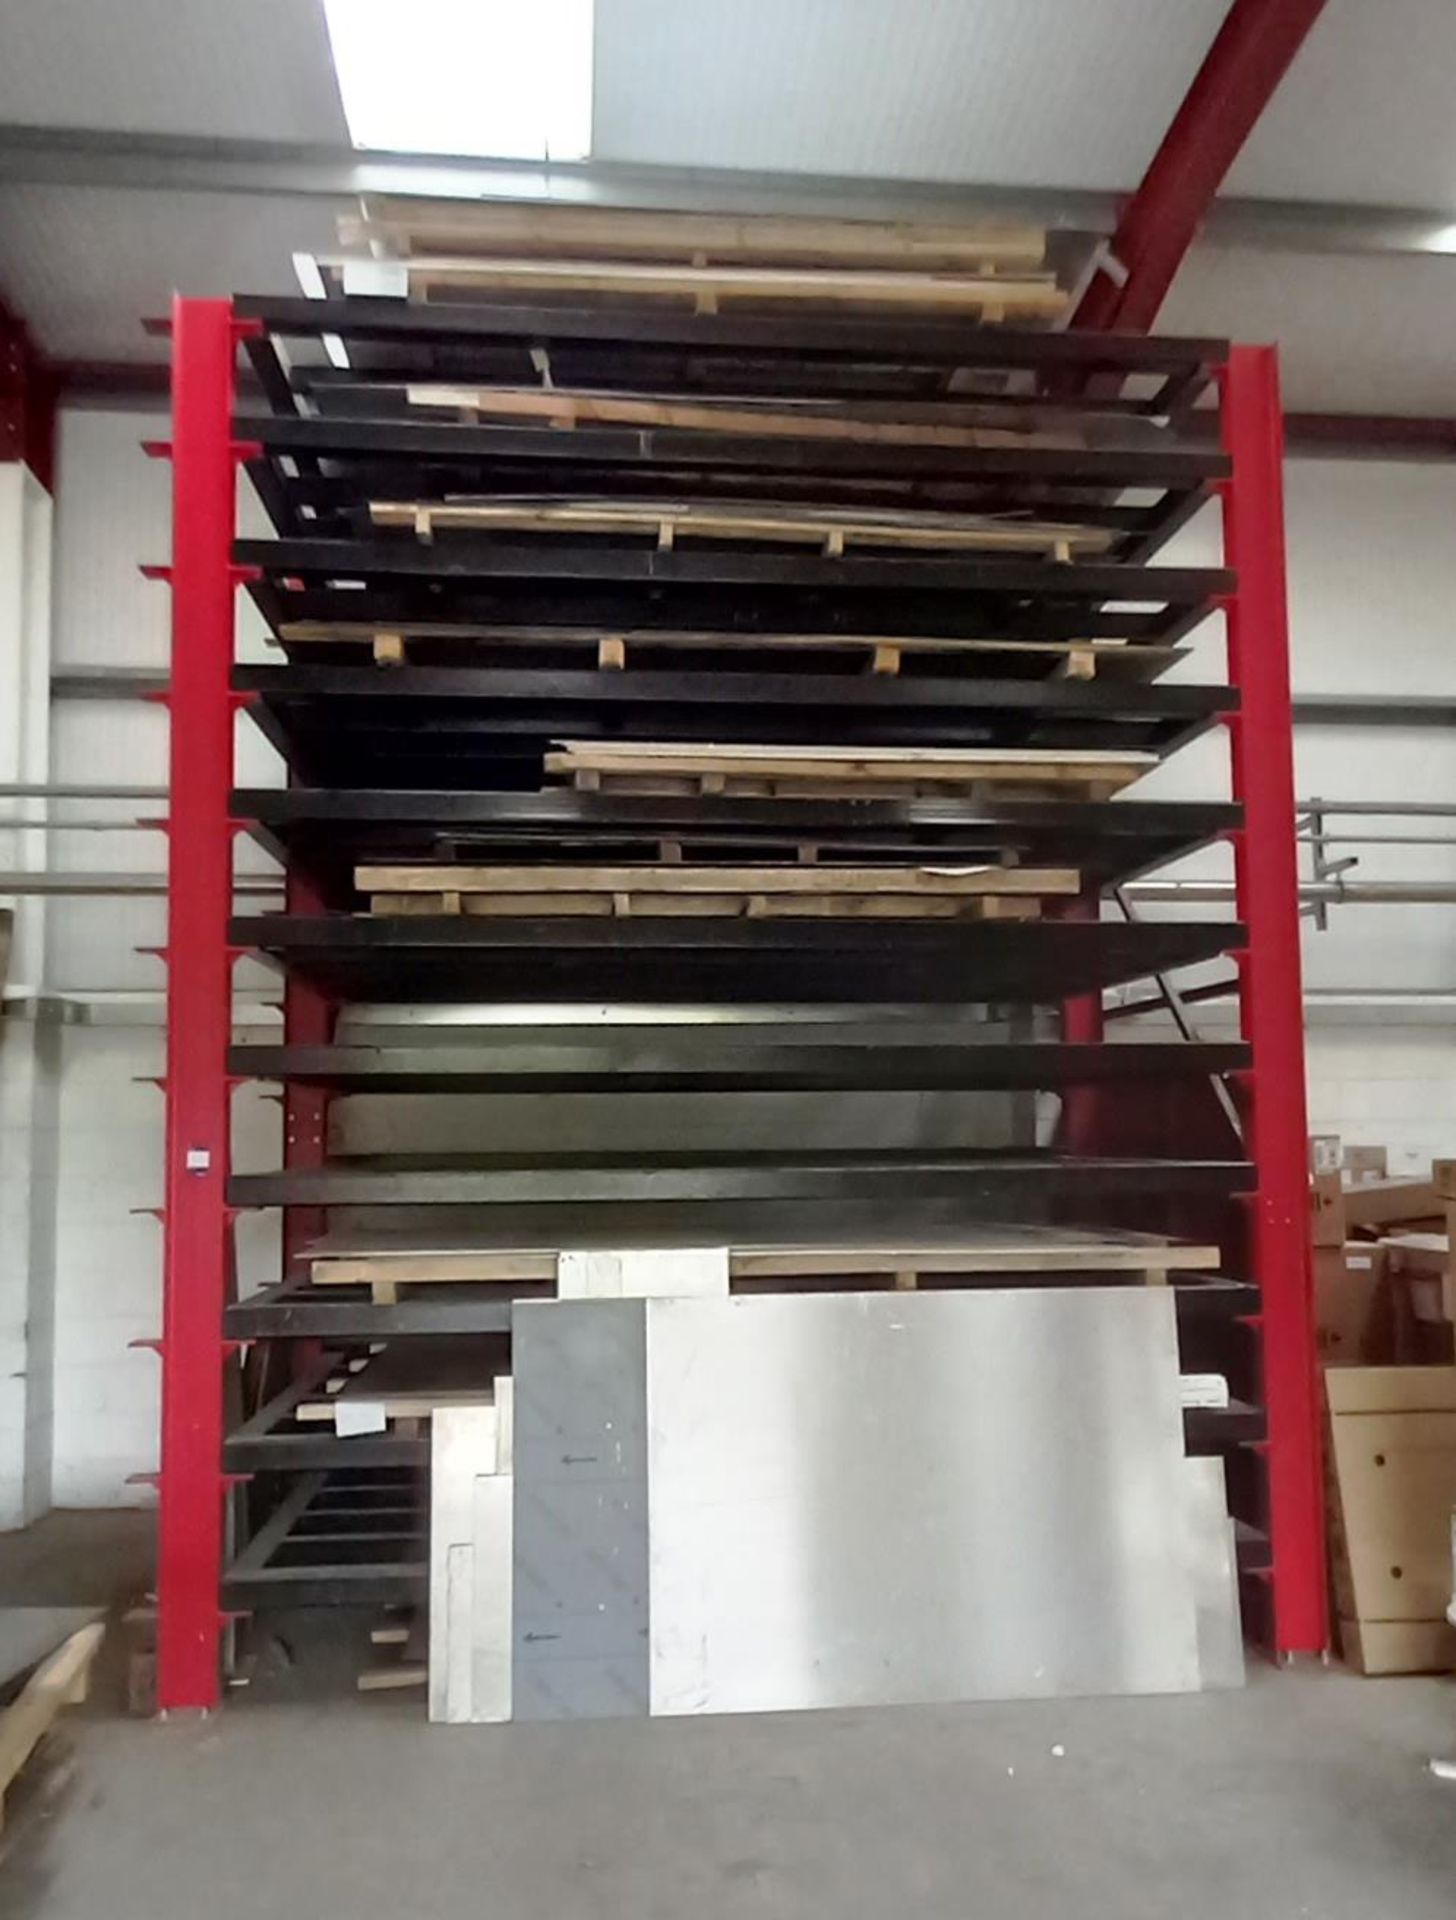 Eleven Tier Sheet Metal Stock Rack, Approximately (4m x 3.5m x 2m) (Viewing Recommended) (